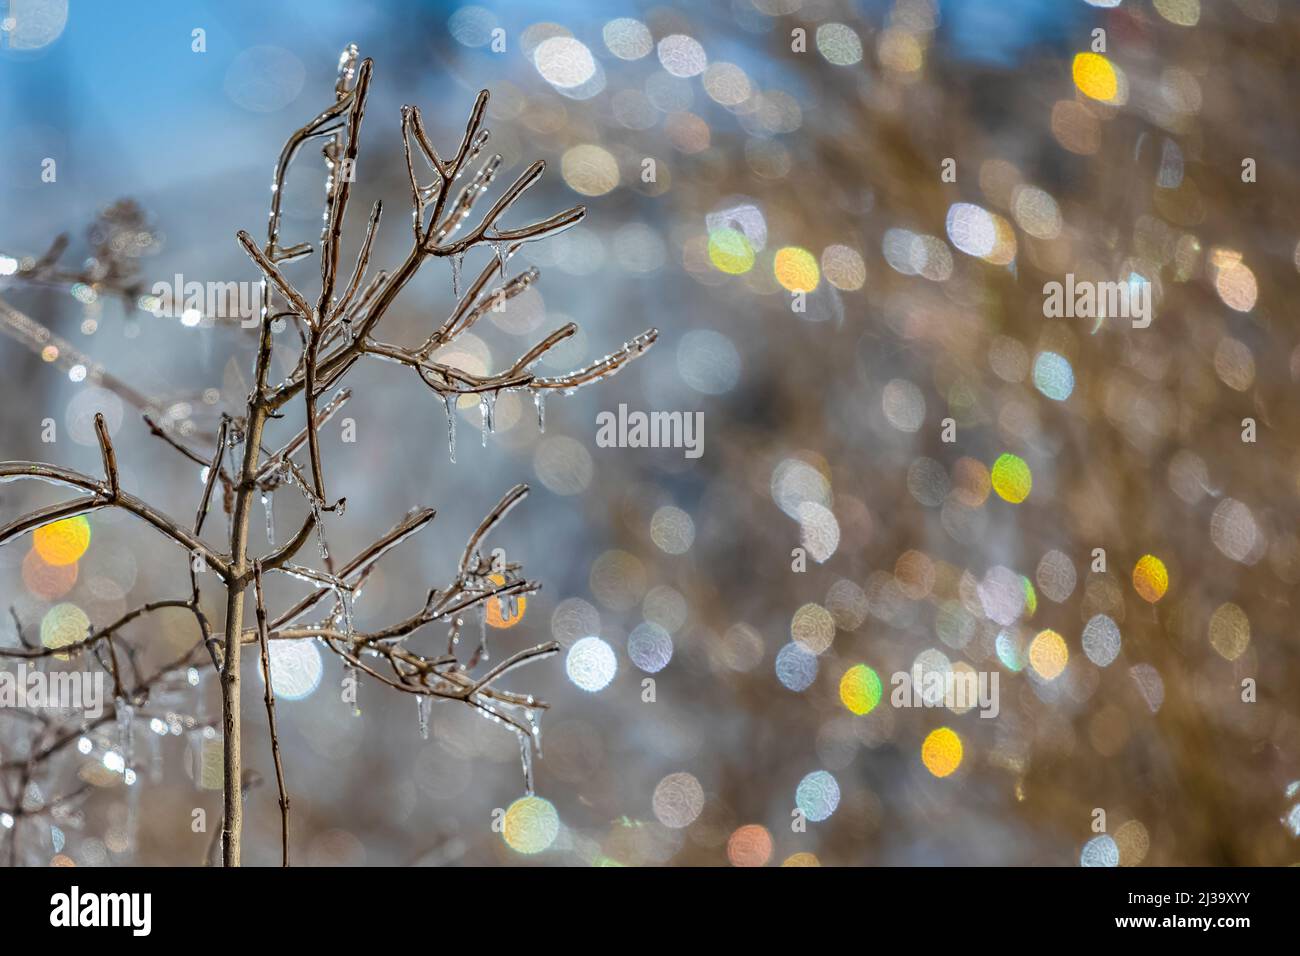 Colorful specular highlights from ice coating branches after an a freezing rain in Michigan, USA Stock Photo